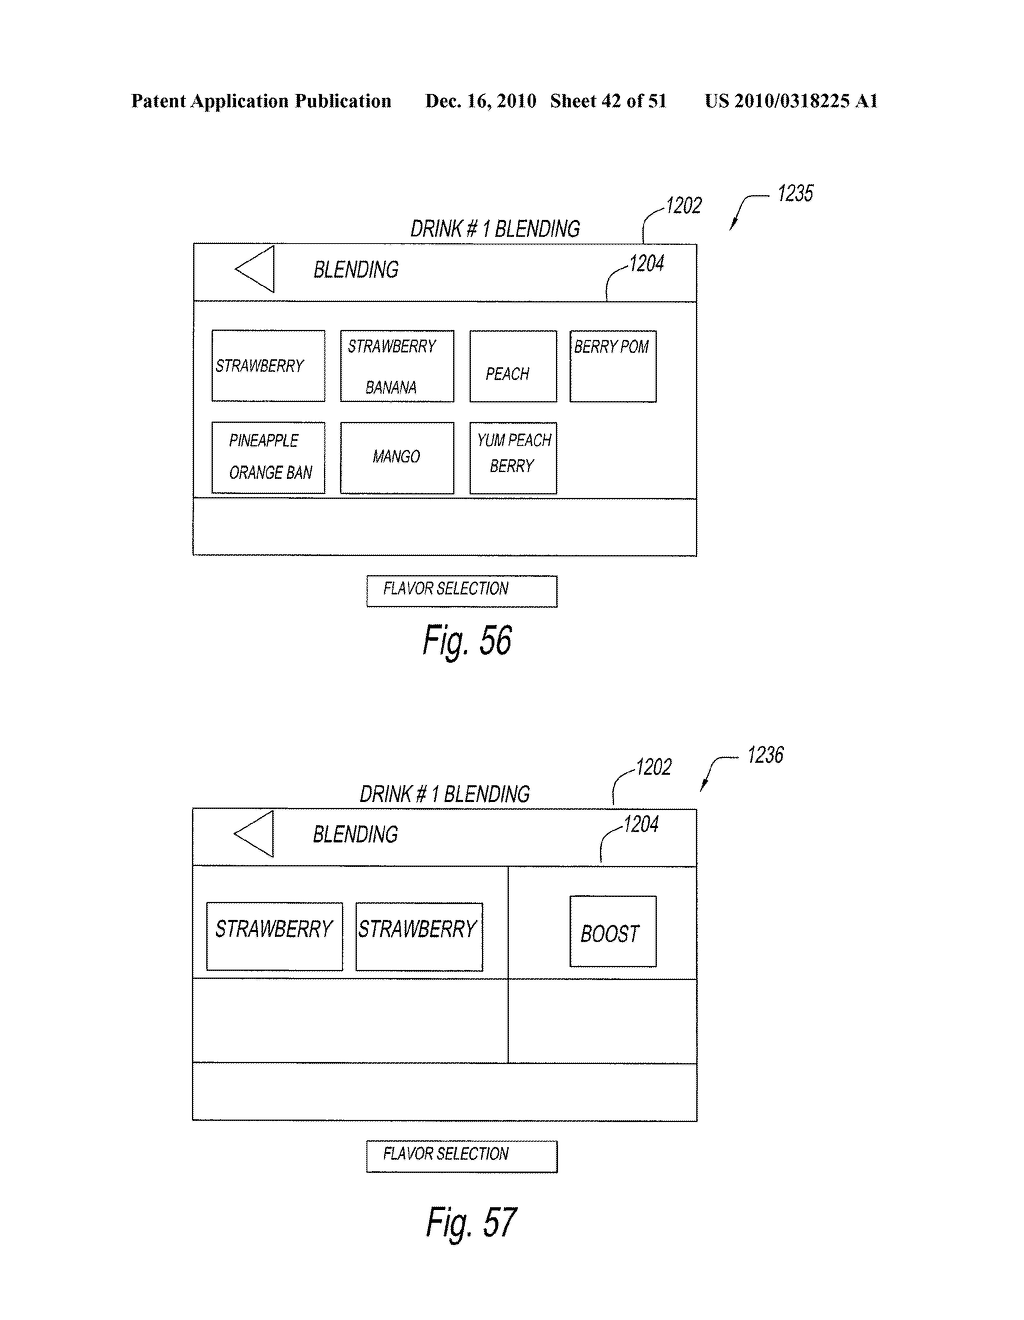 CONTROLLER AND METHOD OF CONTROLLING AN INTEGRATED SYSTEM FOR DISPENSING AND BLENDING/MIXING BEVERAGE INGREDIENTS - diagram, schematic, and image 43